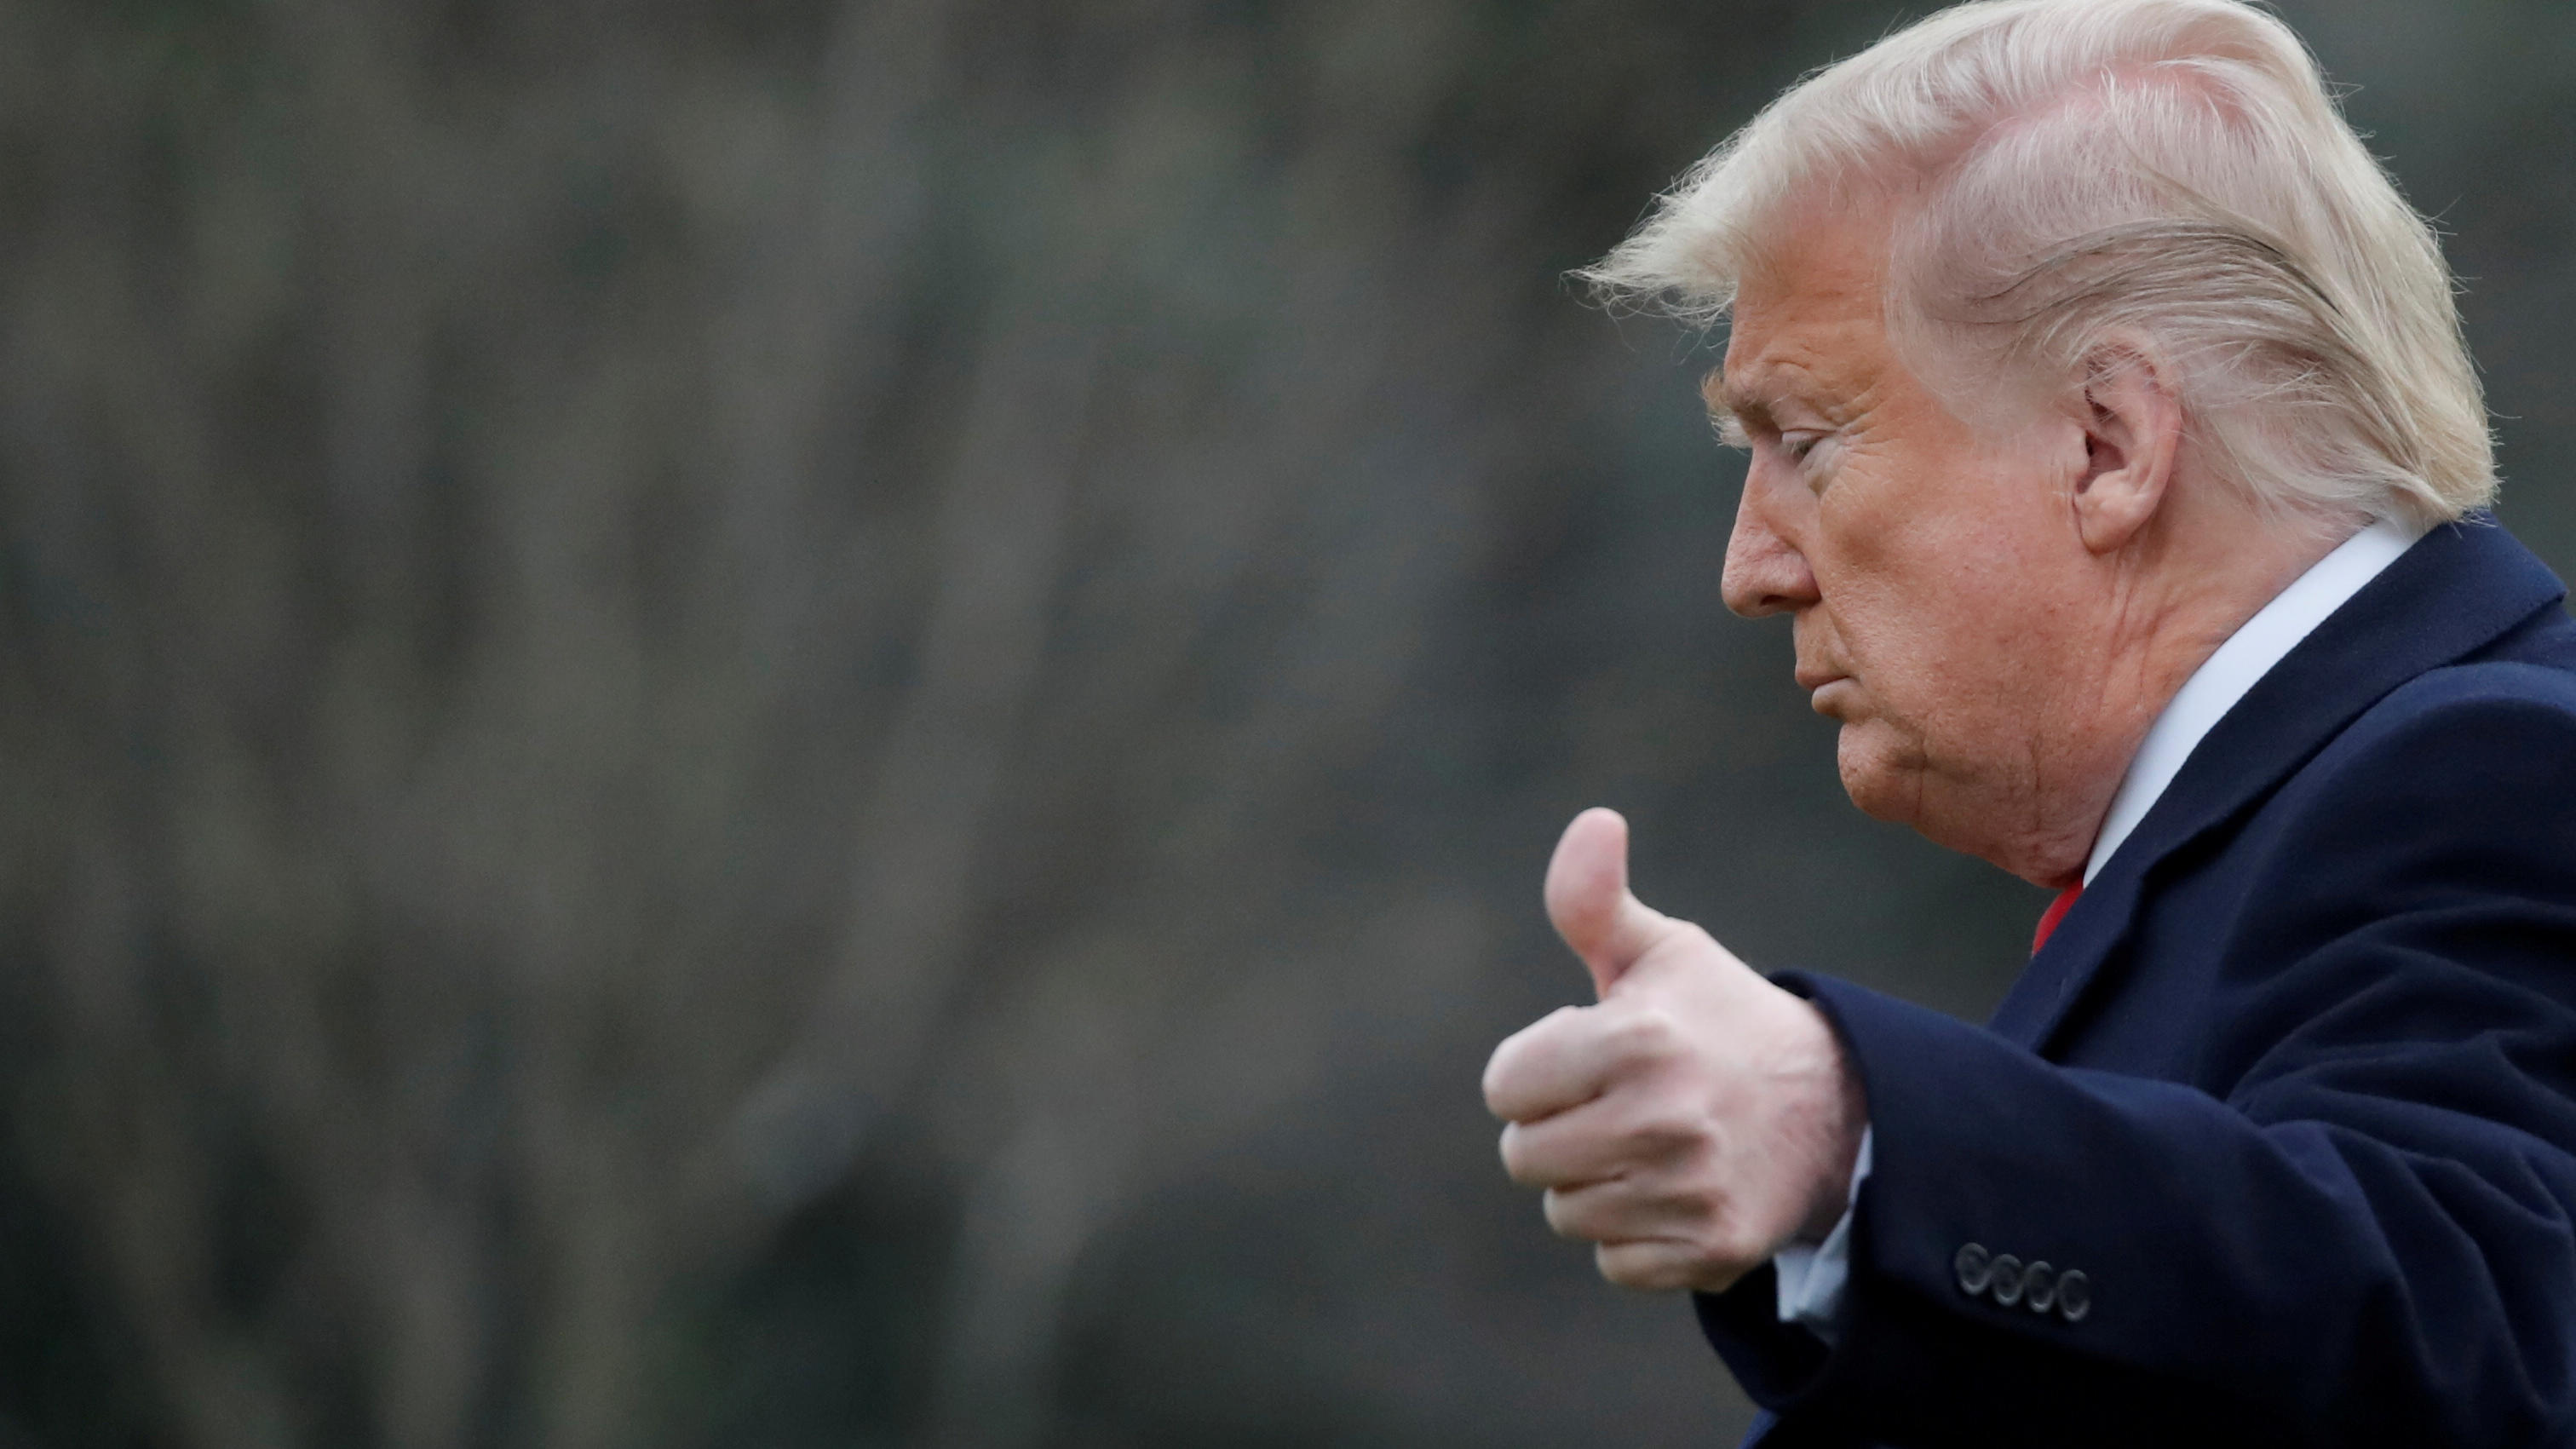 FILE PHOTO: U.S. President Donald Trump gestures to reporters as he departs for travel to Scranton, Pennsylvania from the South Lawn of the White House in Washington, U.S.,  March 5, 2020. REUTERS/Carlos Barria/File Photo